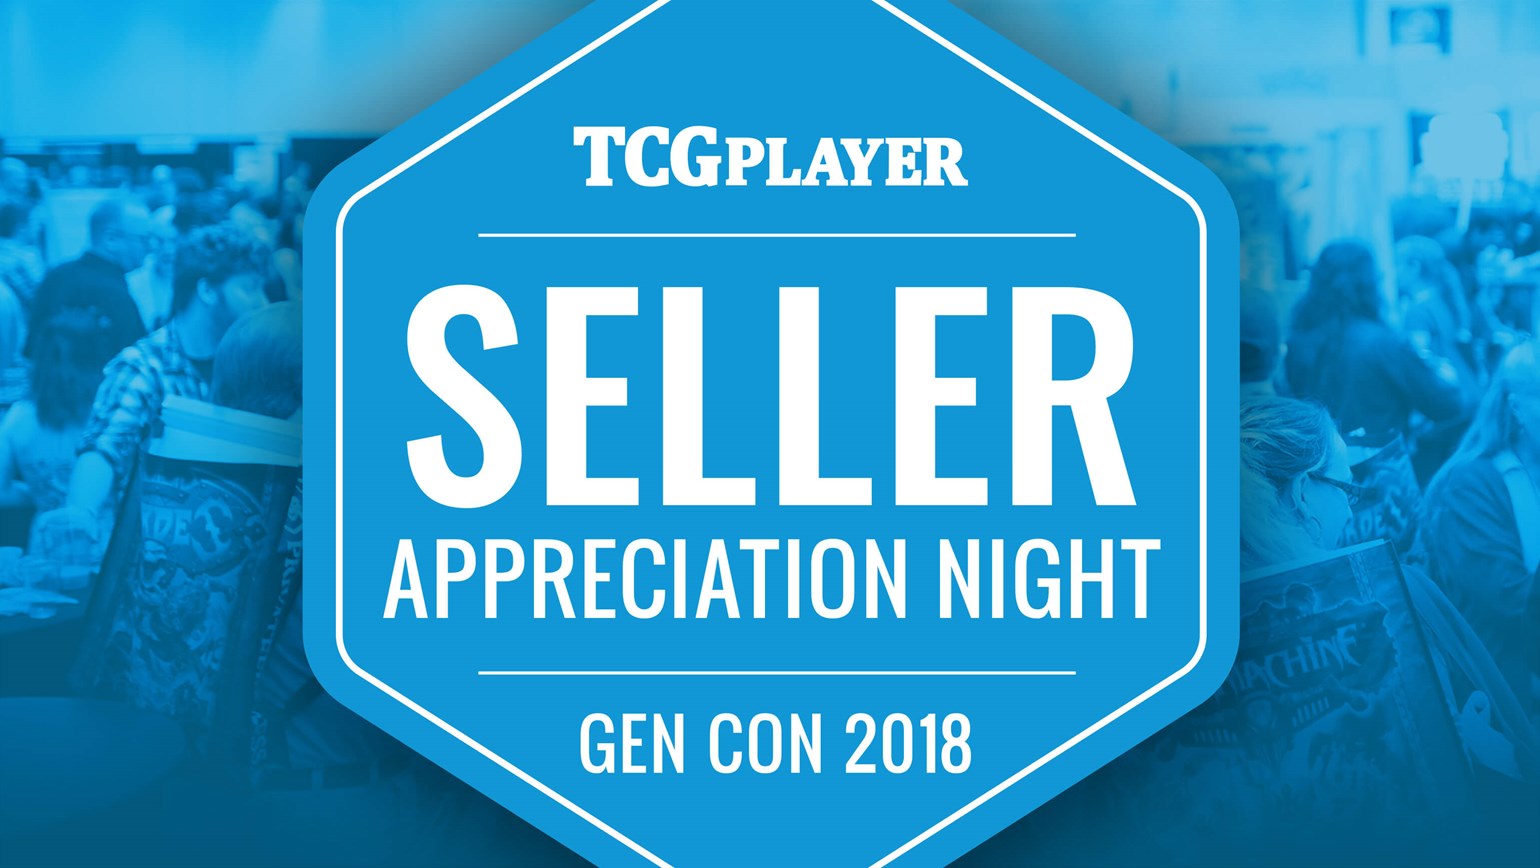 Ready for Gen Con? RSVP for Seller Appreciation Night and Update Your Buylist